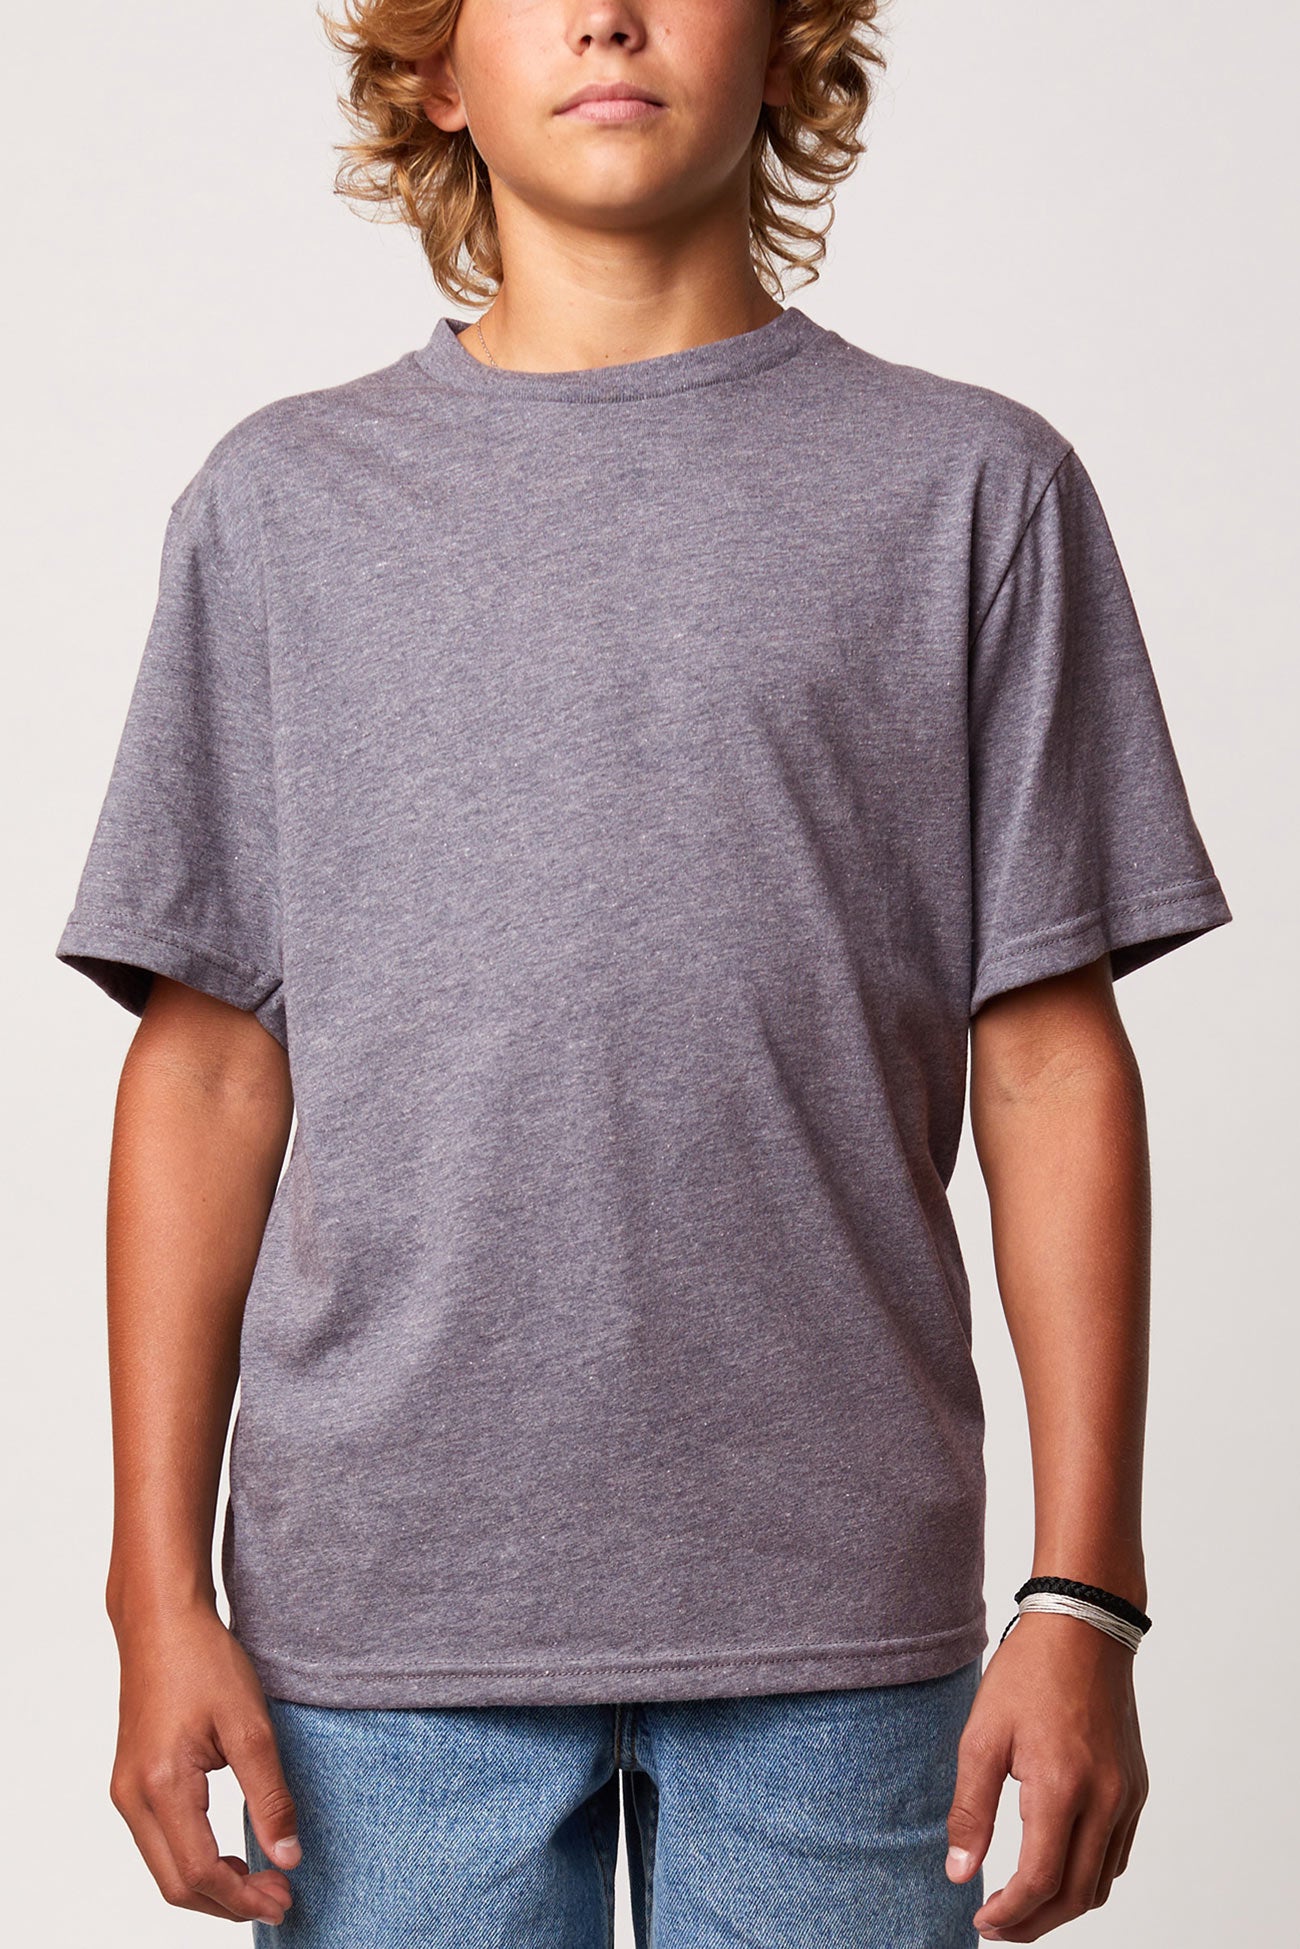 #CY1150SS Prime - Short Sleeve Crew - Youth